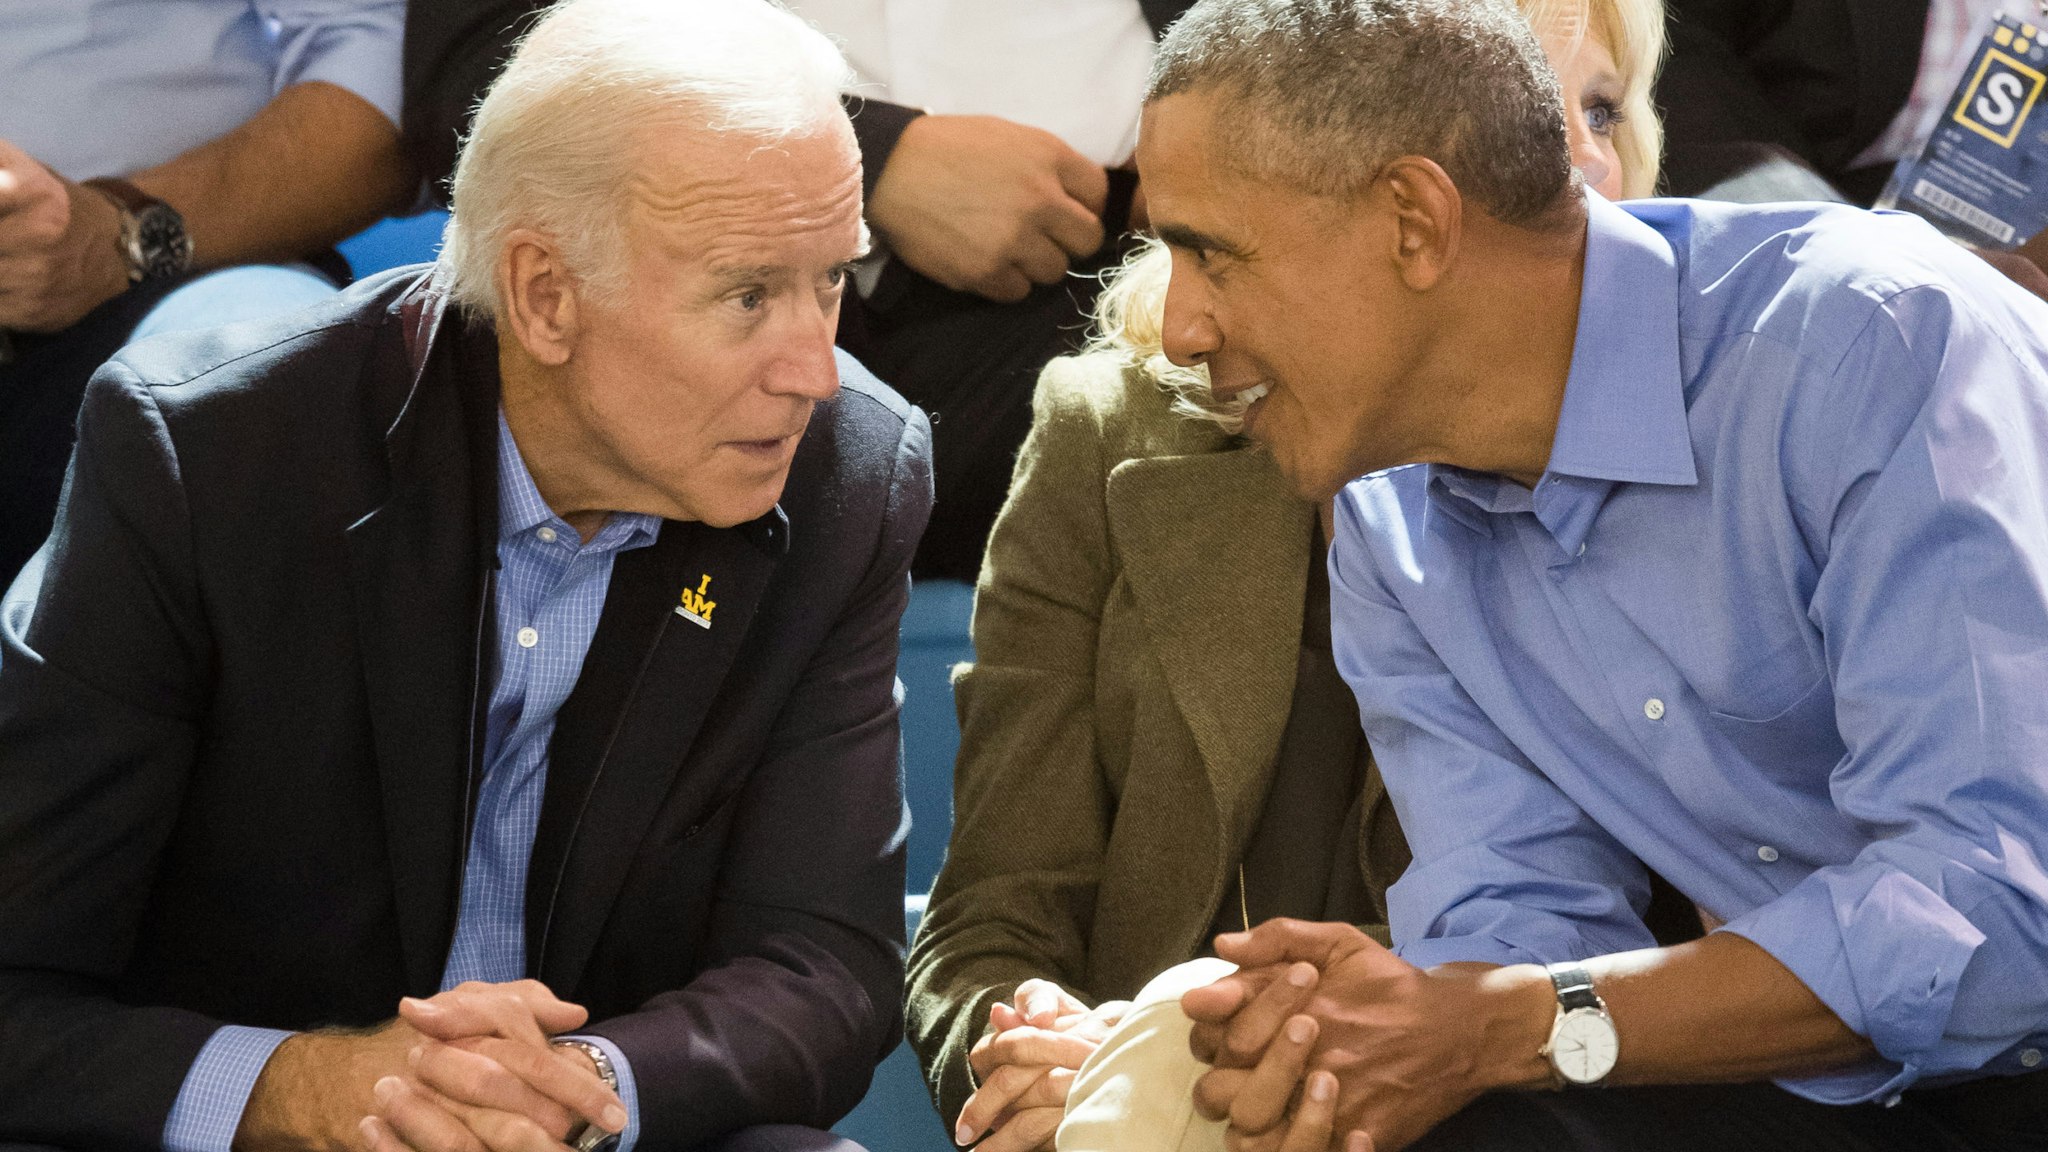 TORONTO, ON - SEPTEMBER 29: Joe Biden and Barack Obama watch the wheelchair basketball on day 7 of the Invictus Games Toronto 2017 on September 29, 2017 in Toronto, Canada. The Games use the power of sport to inspire recovery, support rehabilitation and generate a wider understanding and respect for the Armed Forces. (Photo by Samir Hussein/Samir Hussein/WireImage)